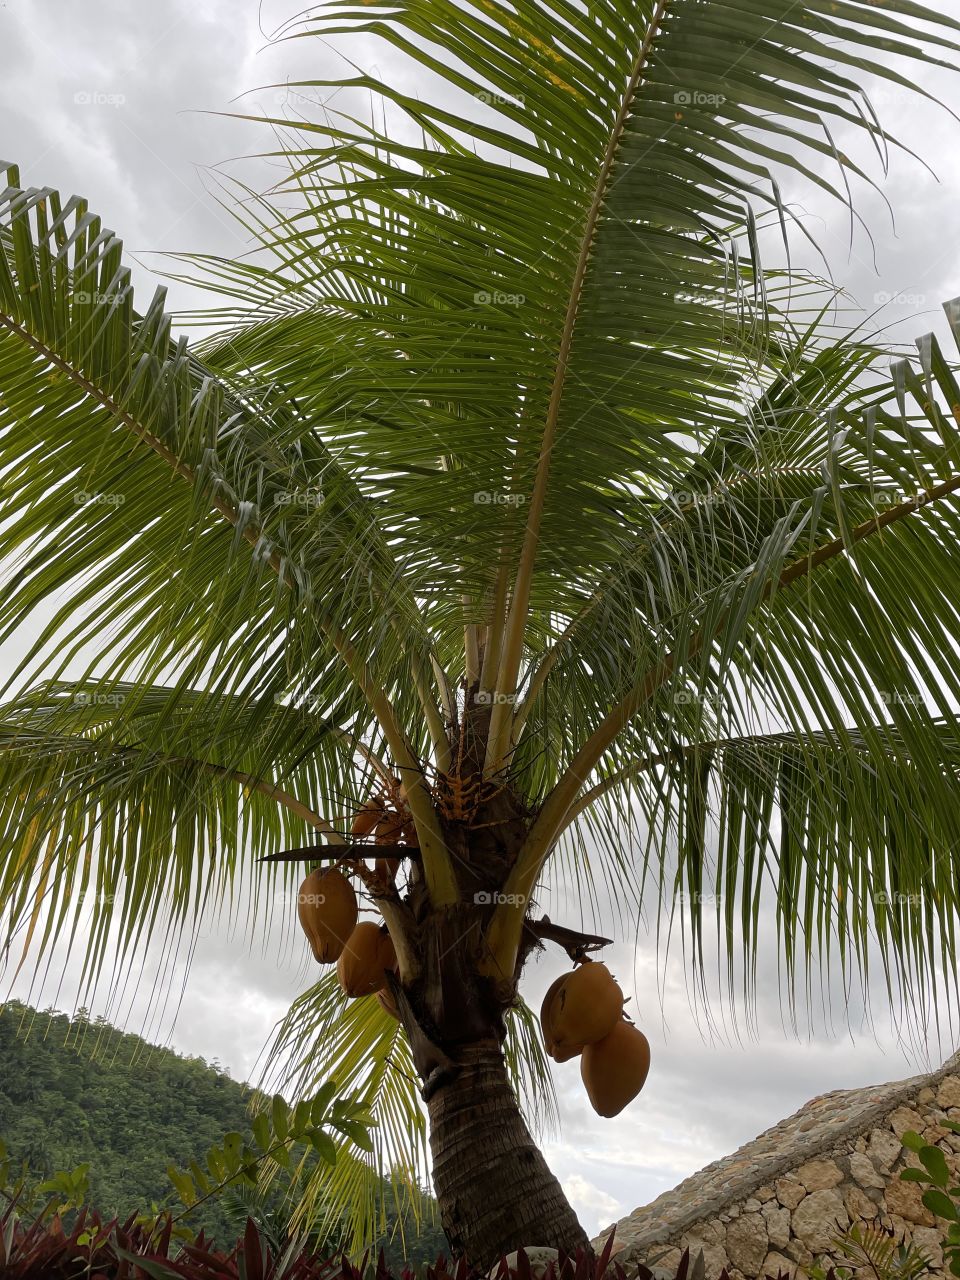 Coconut tree with fruits